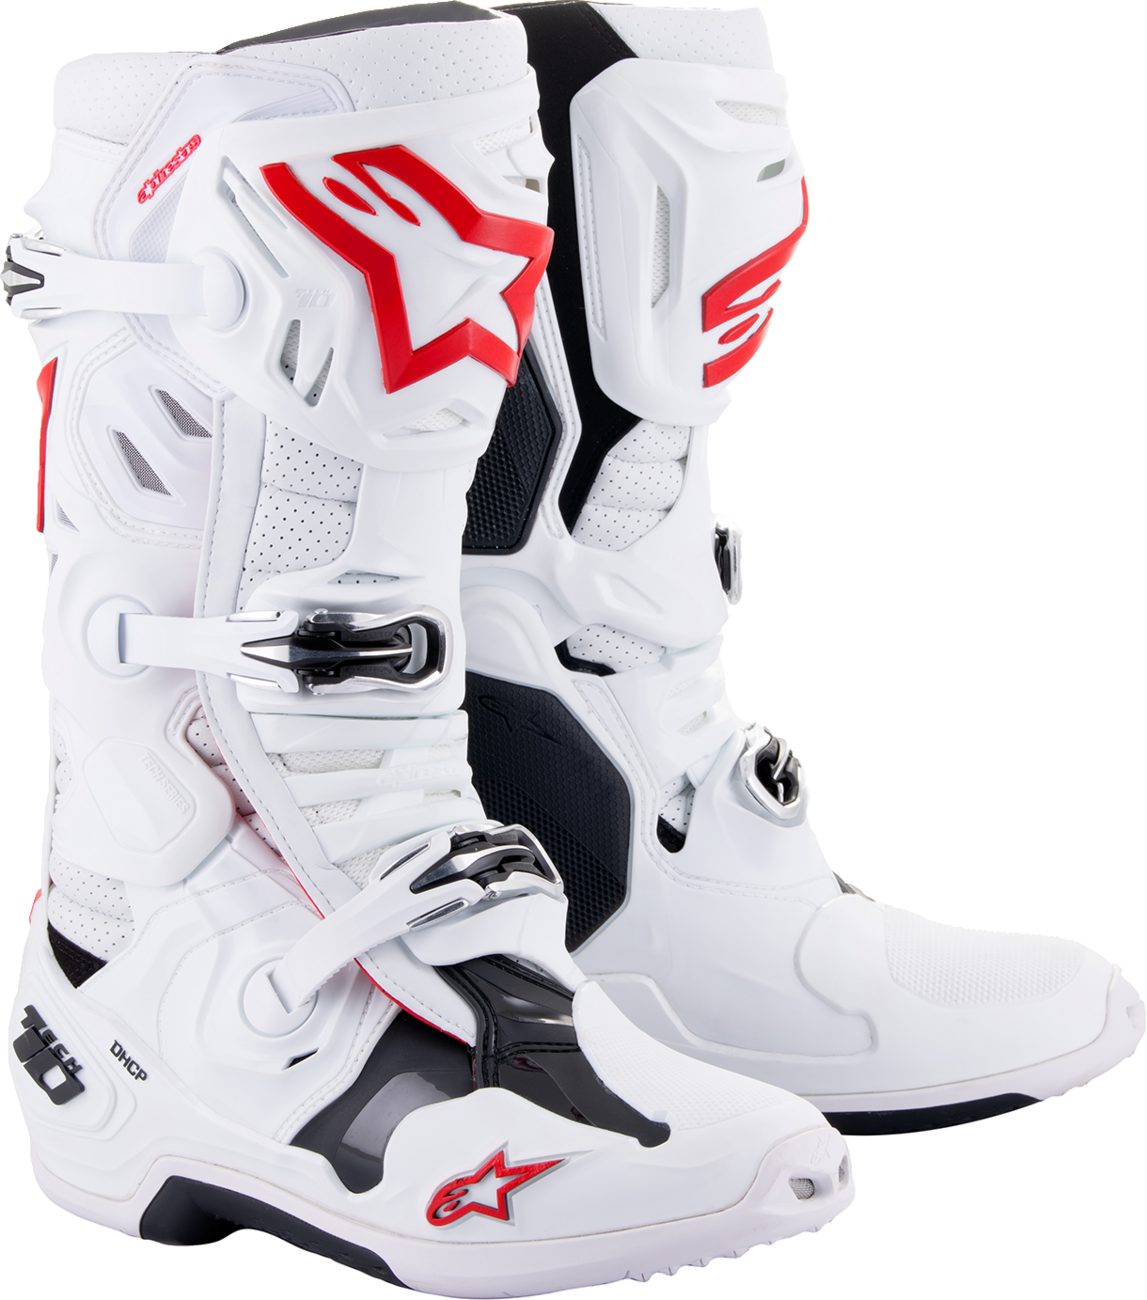 ALPINESTARS Tech 10 Supervented Boots - White/Red - US 7 2010520-2230-7